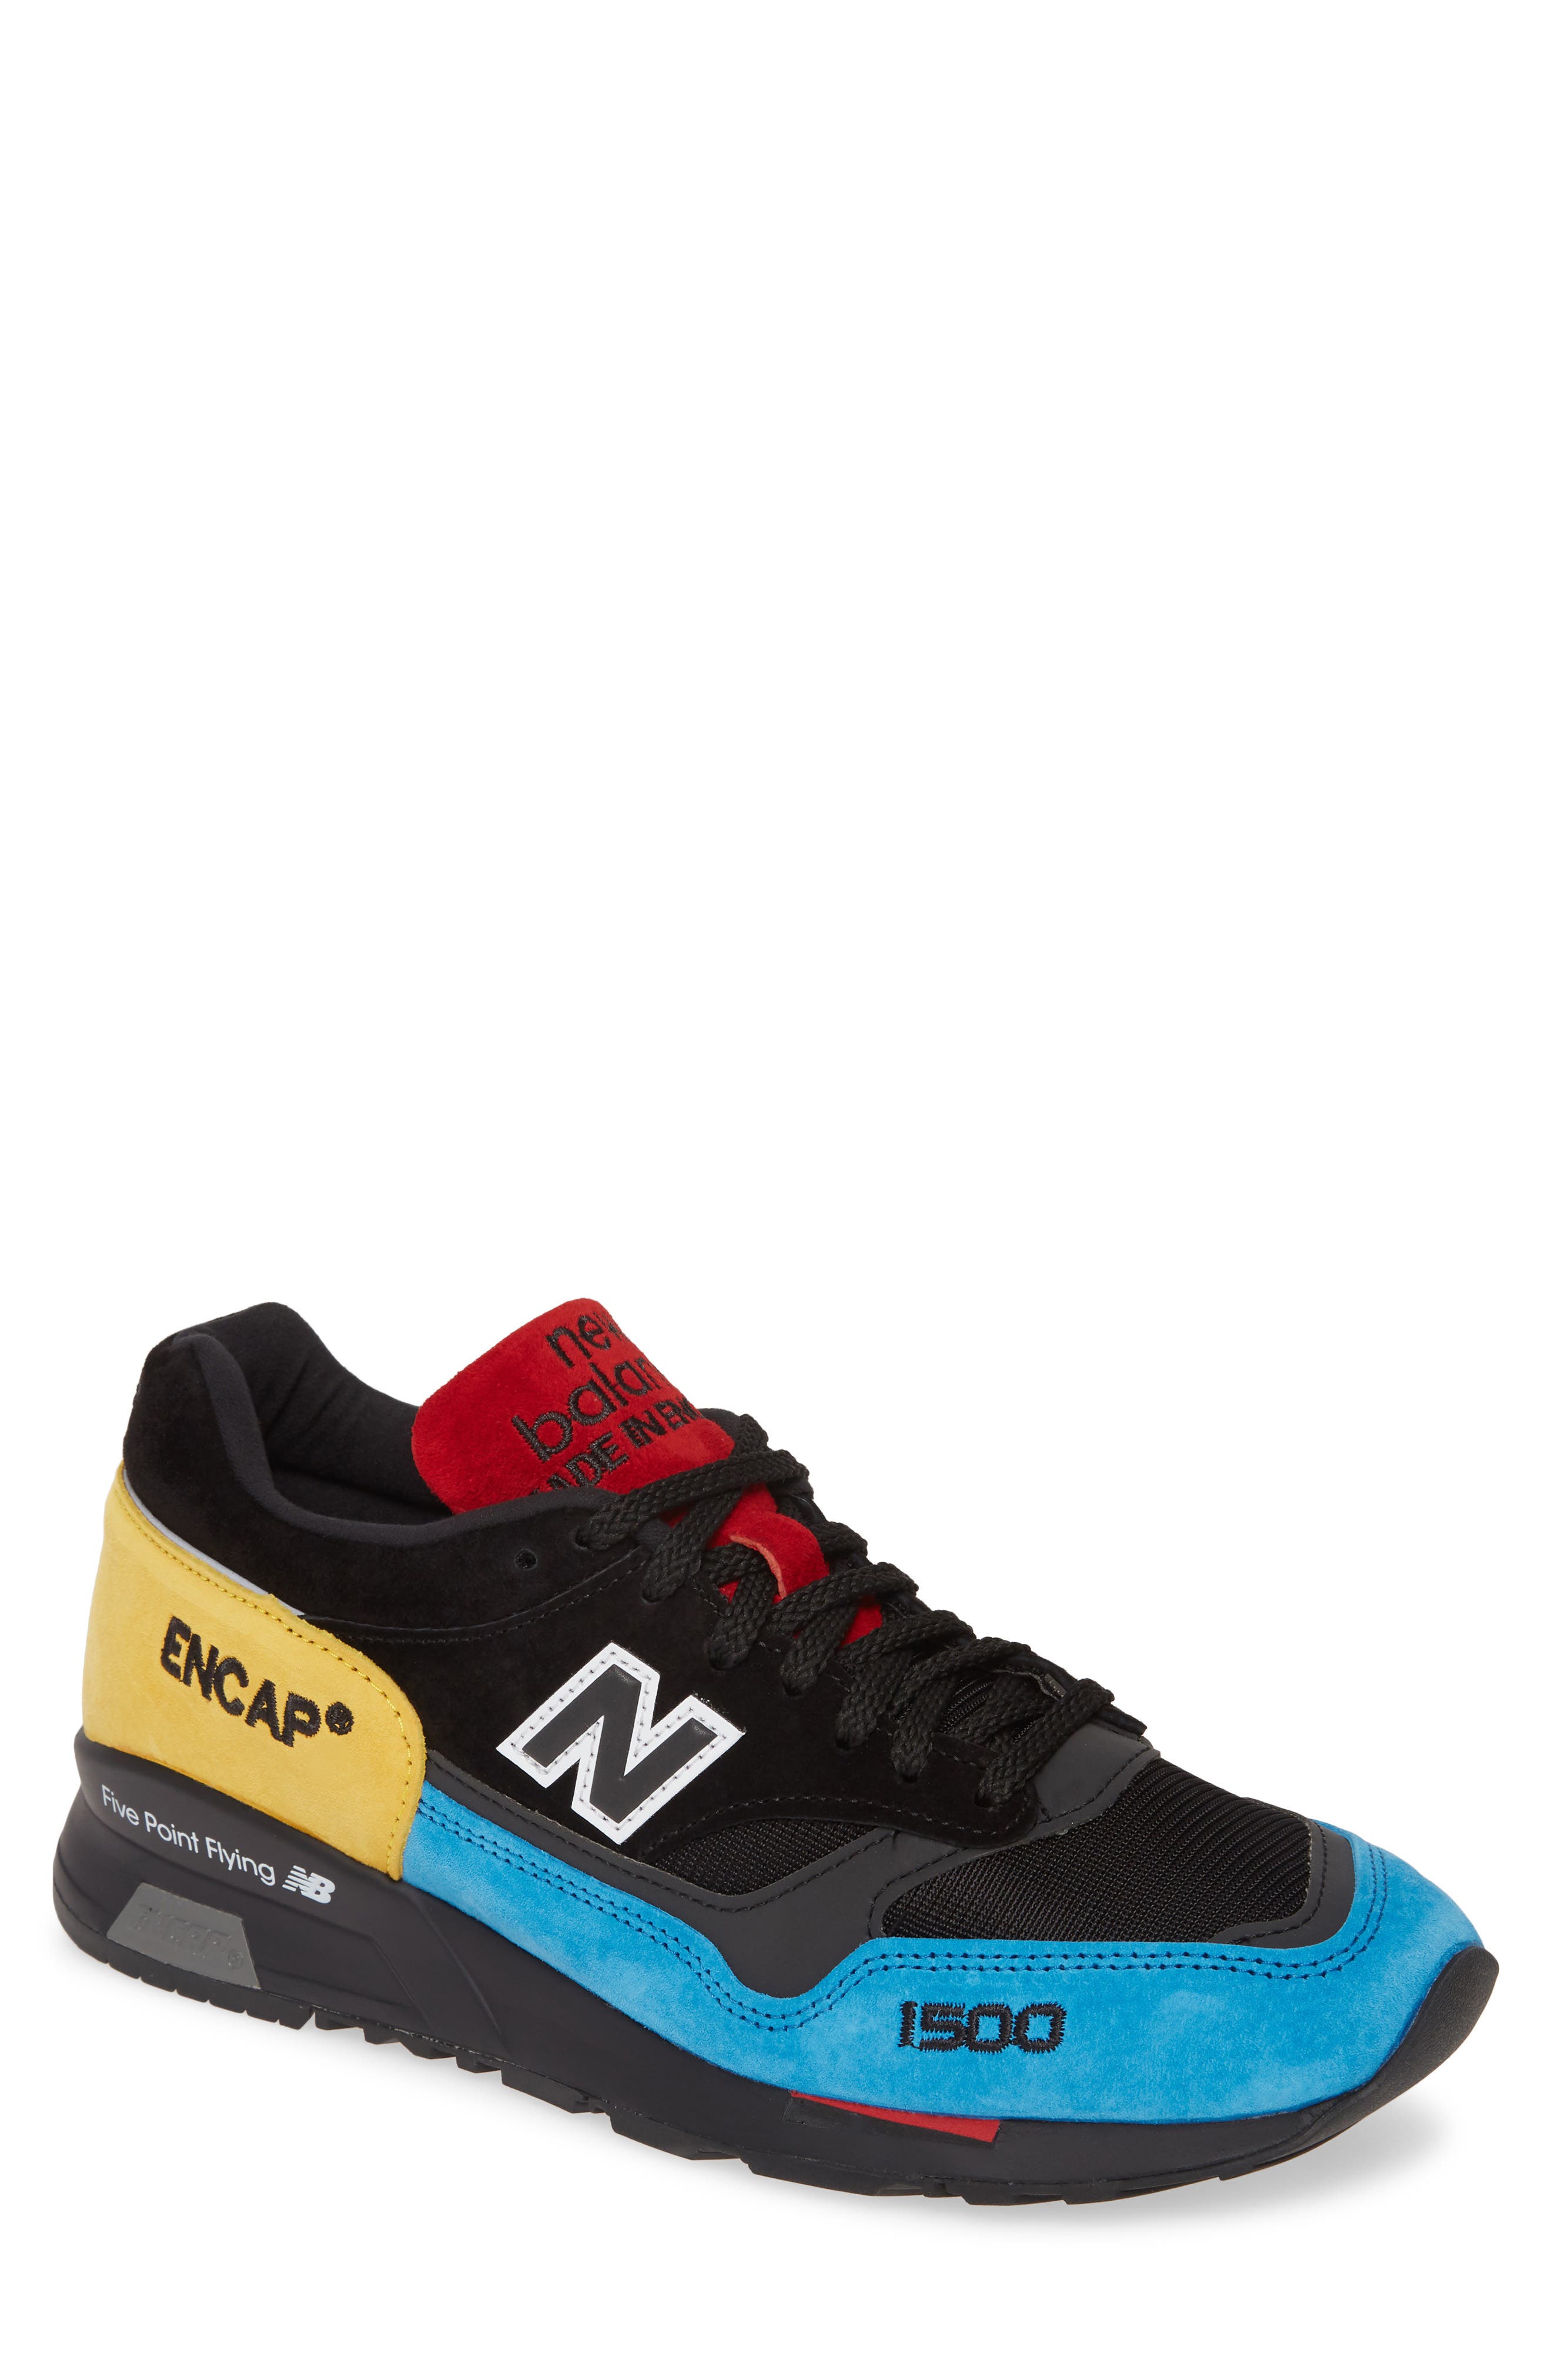 are new balance shoes made in uk